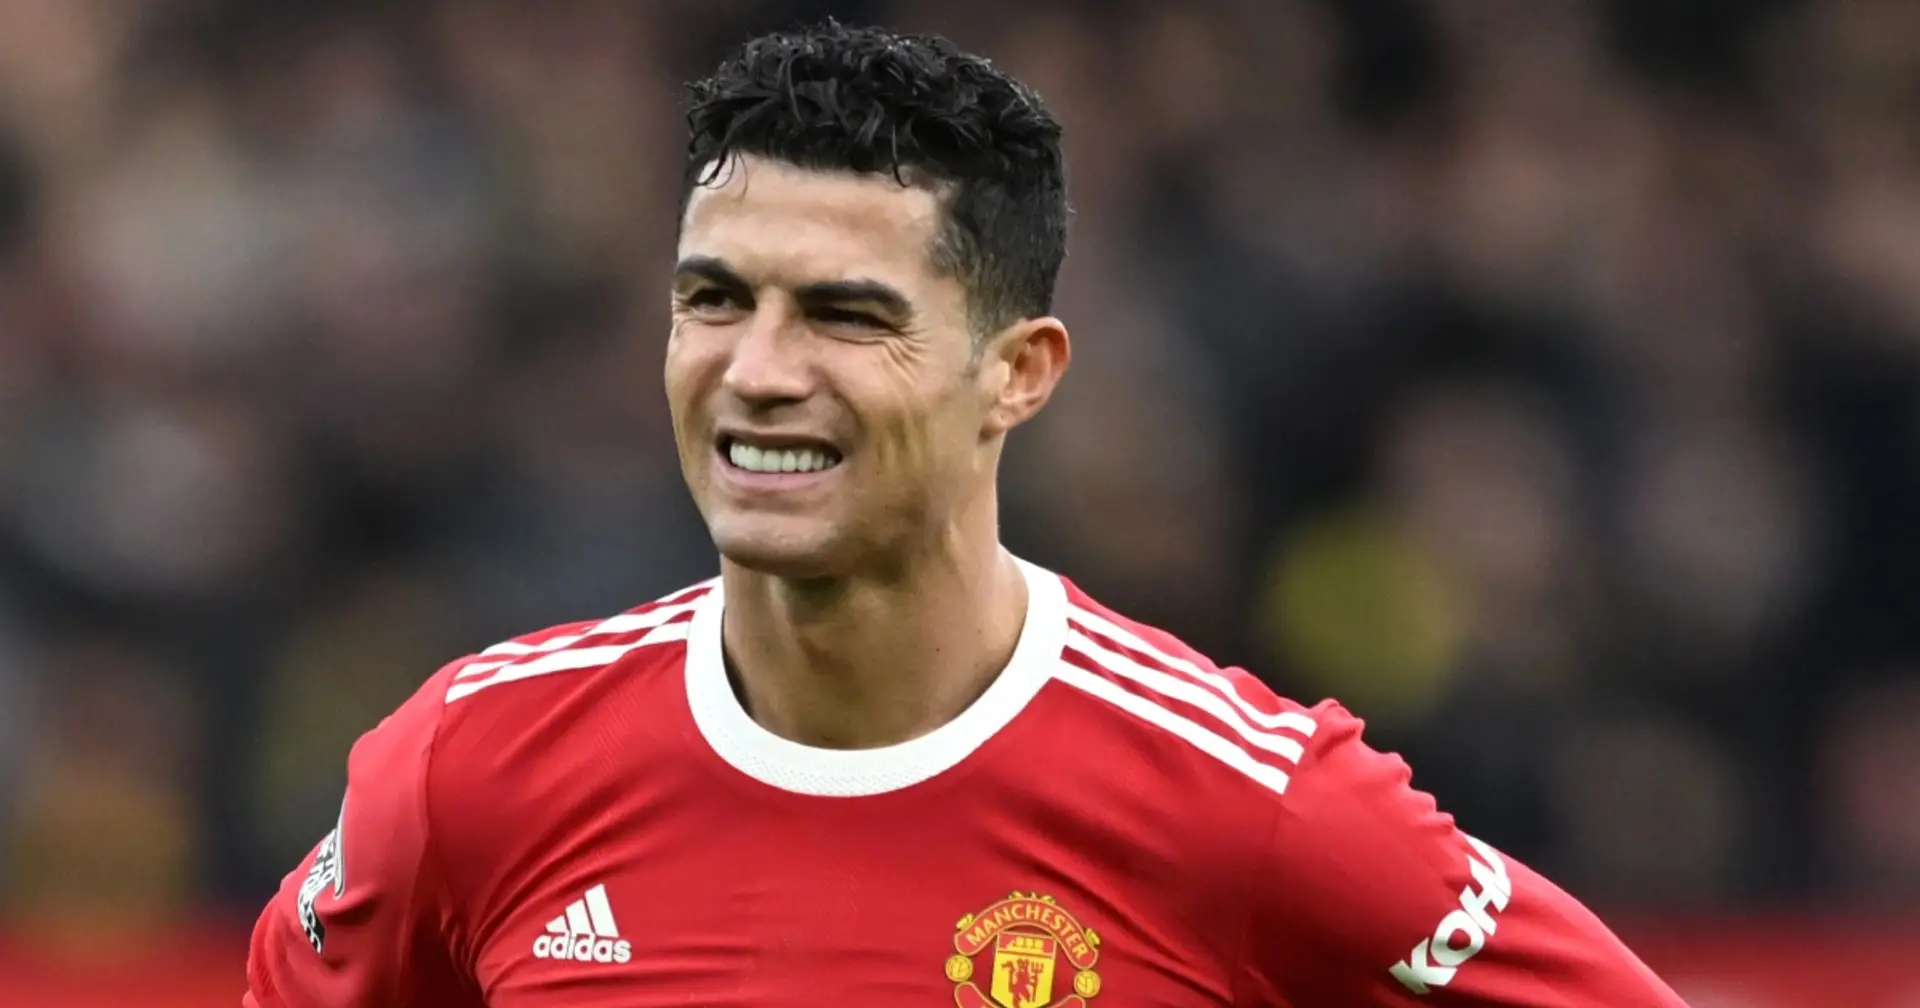 Revealed: Ronaldo's abysmal record in last 10 games for Man United